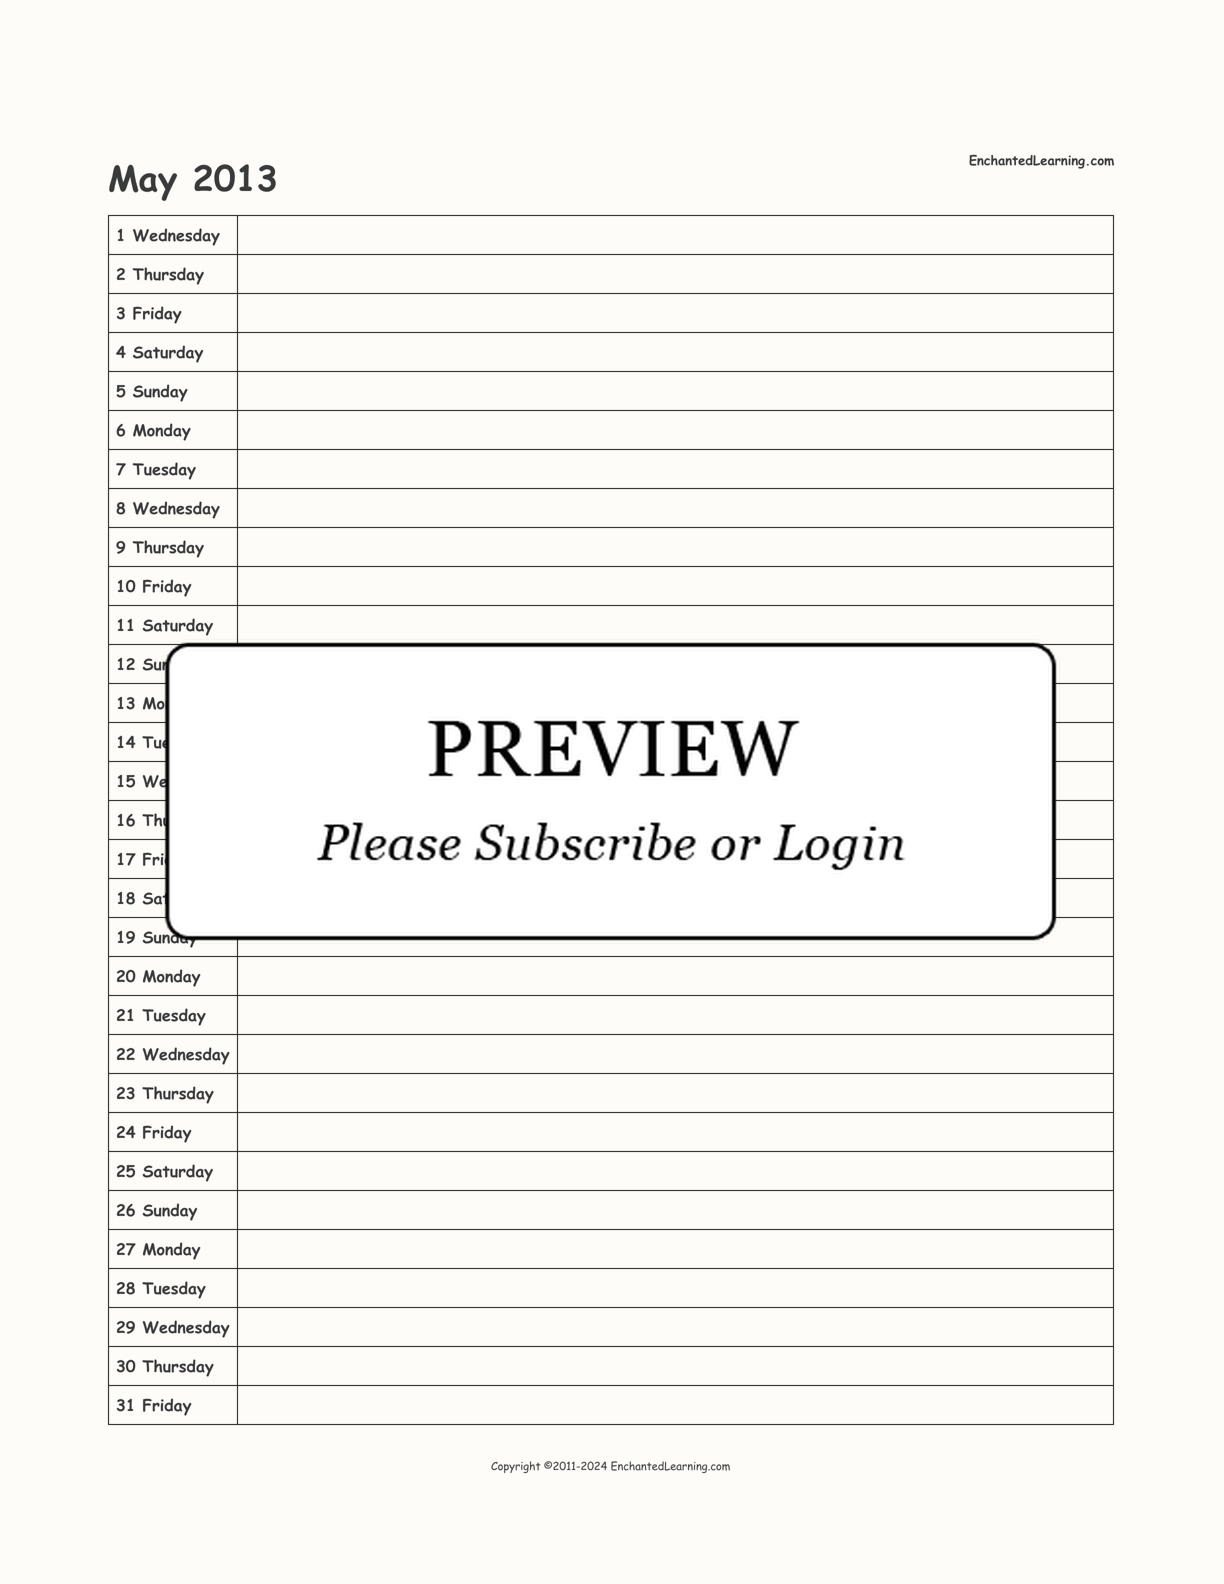 2013 Scheduling Calendar interactive printout page 5